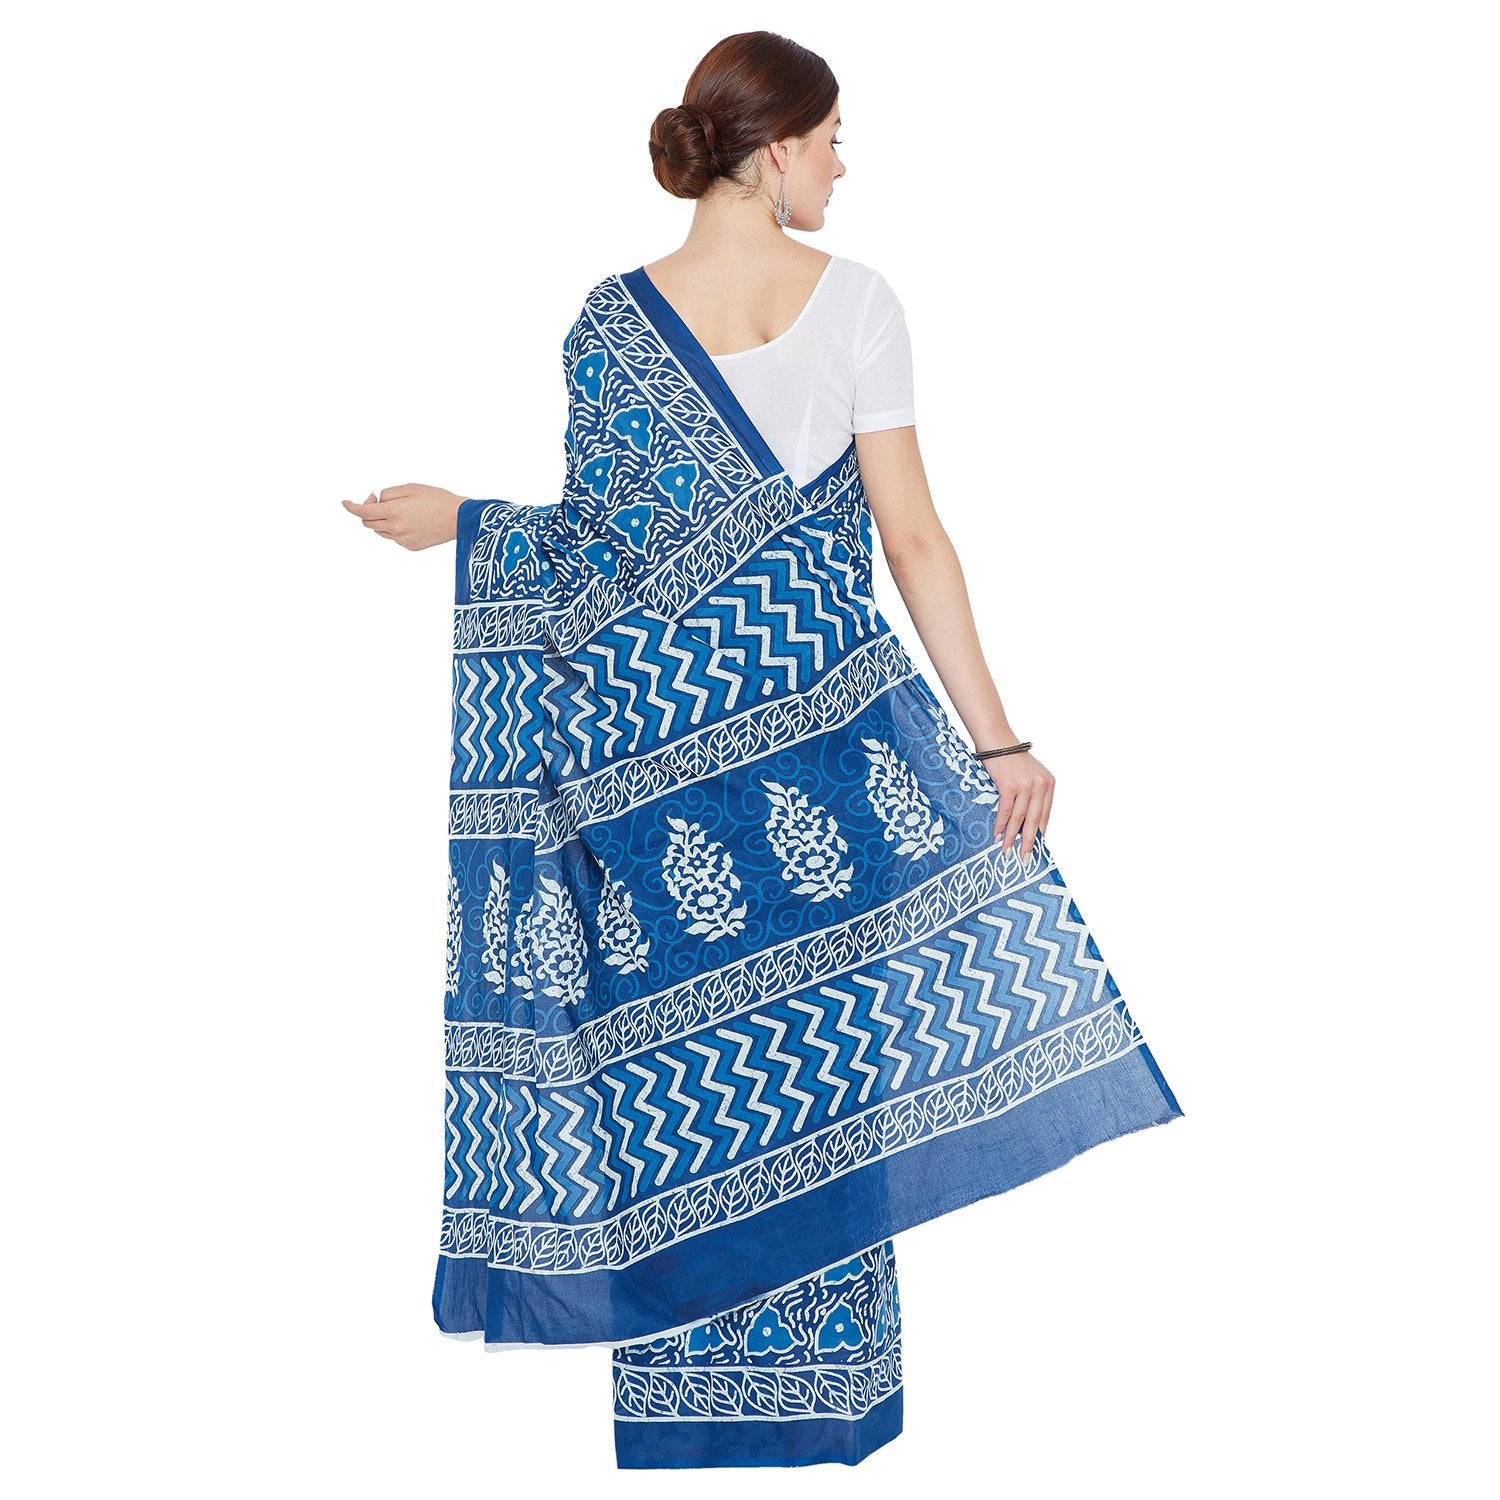 Blue Indigo Screen Print Handcrafted Cotton Saree-Saree-Kalakari India-RDSNSA0112-Cotton, Geographical Indication, Hand Blocks, Hand Crafted, Heritage Prints, Indigo, Sarees, Screen Print, Sustainable Fabrics-[Linen,Ethnic,wear,Fashionista,Handloom,Handicraft,Indigo,blockprint,block,print,Cotton,Chanderi,Blue, latest,classy,party,bollywood,trendy,summer,style,traditional,formal,elegant,unique,style,hand,block,print, dabu,booti,gift,present,glamorous,affordable,collectible,Sari,Saree,printed, hol